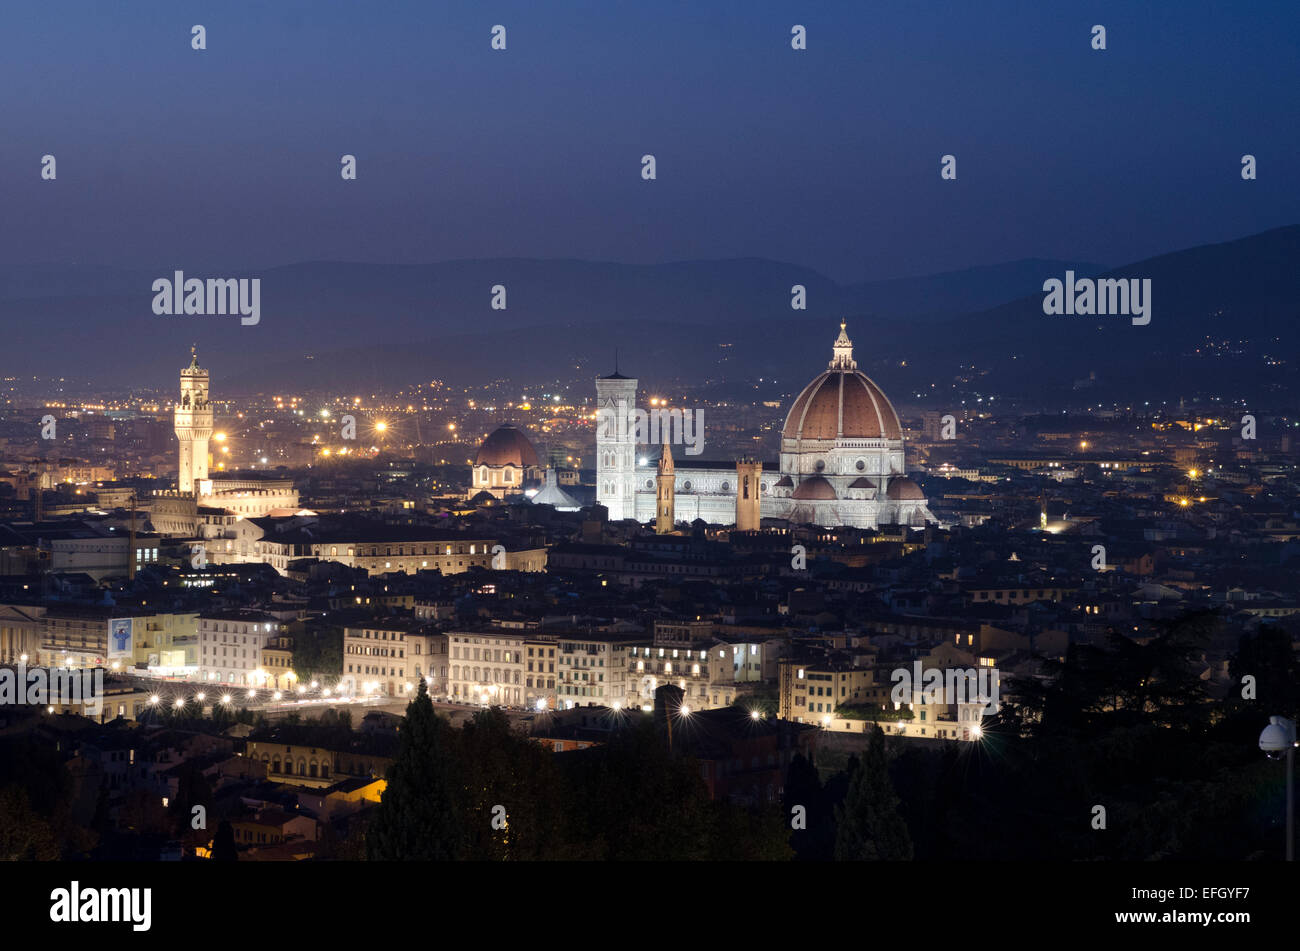 Evening shot of Florence showing cathedral, bell tower and other landmarks Stock Photo